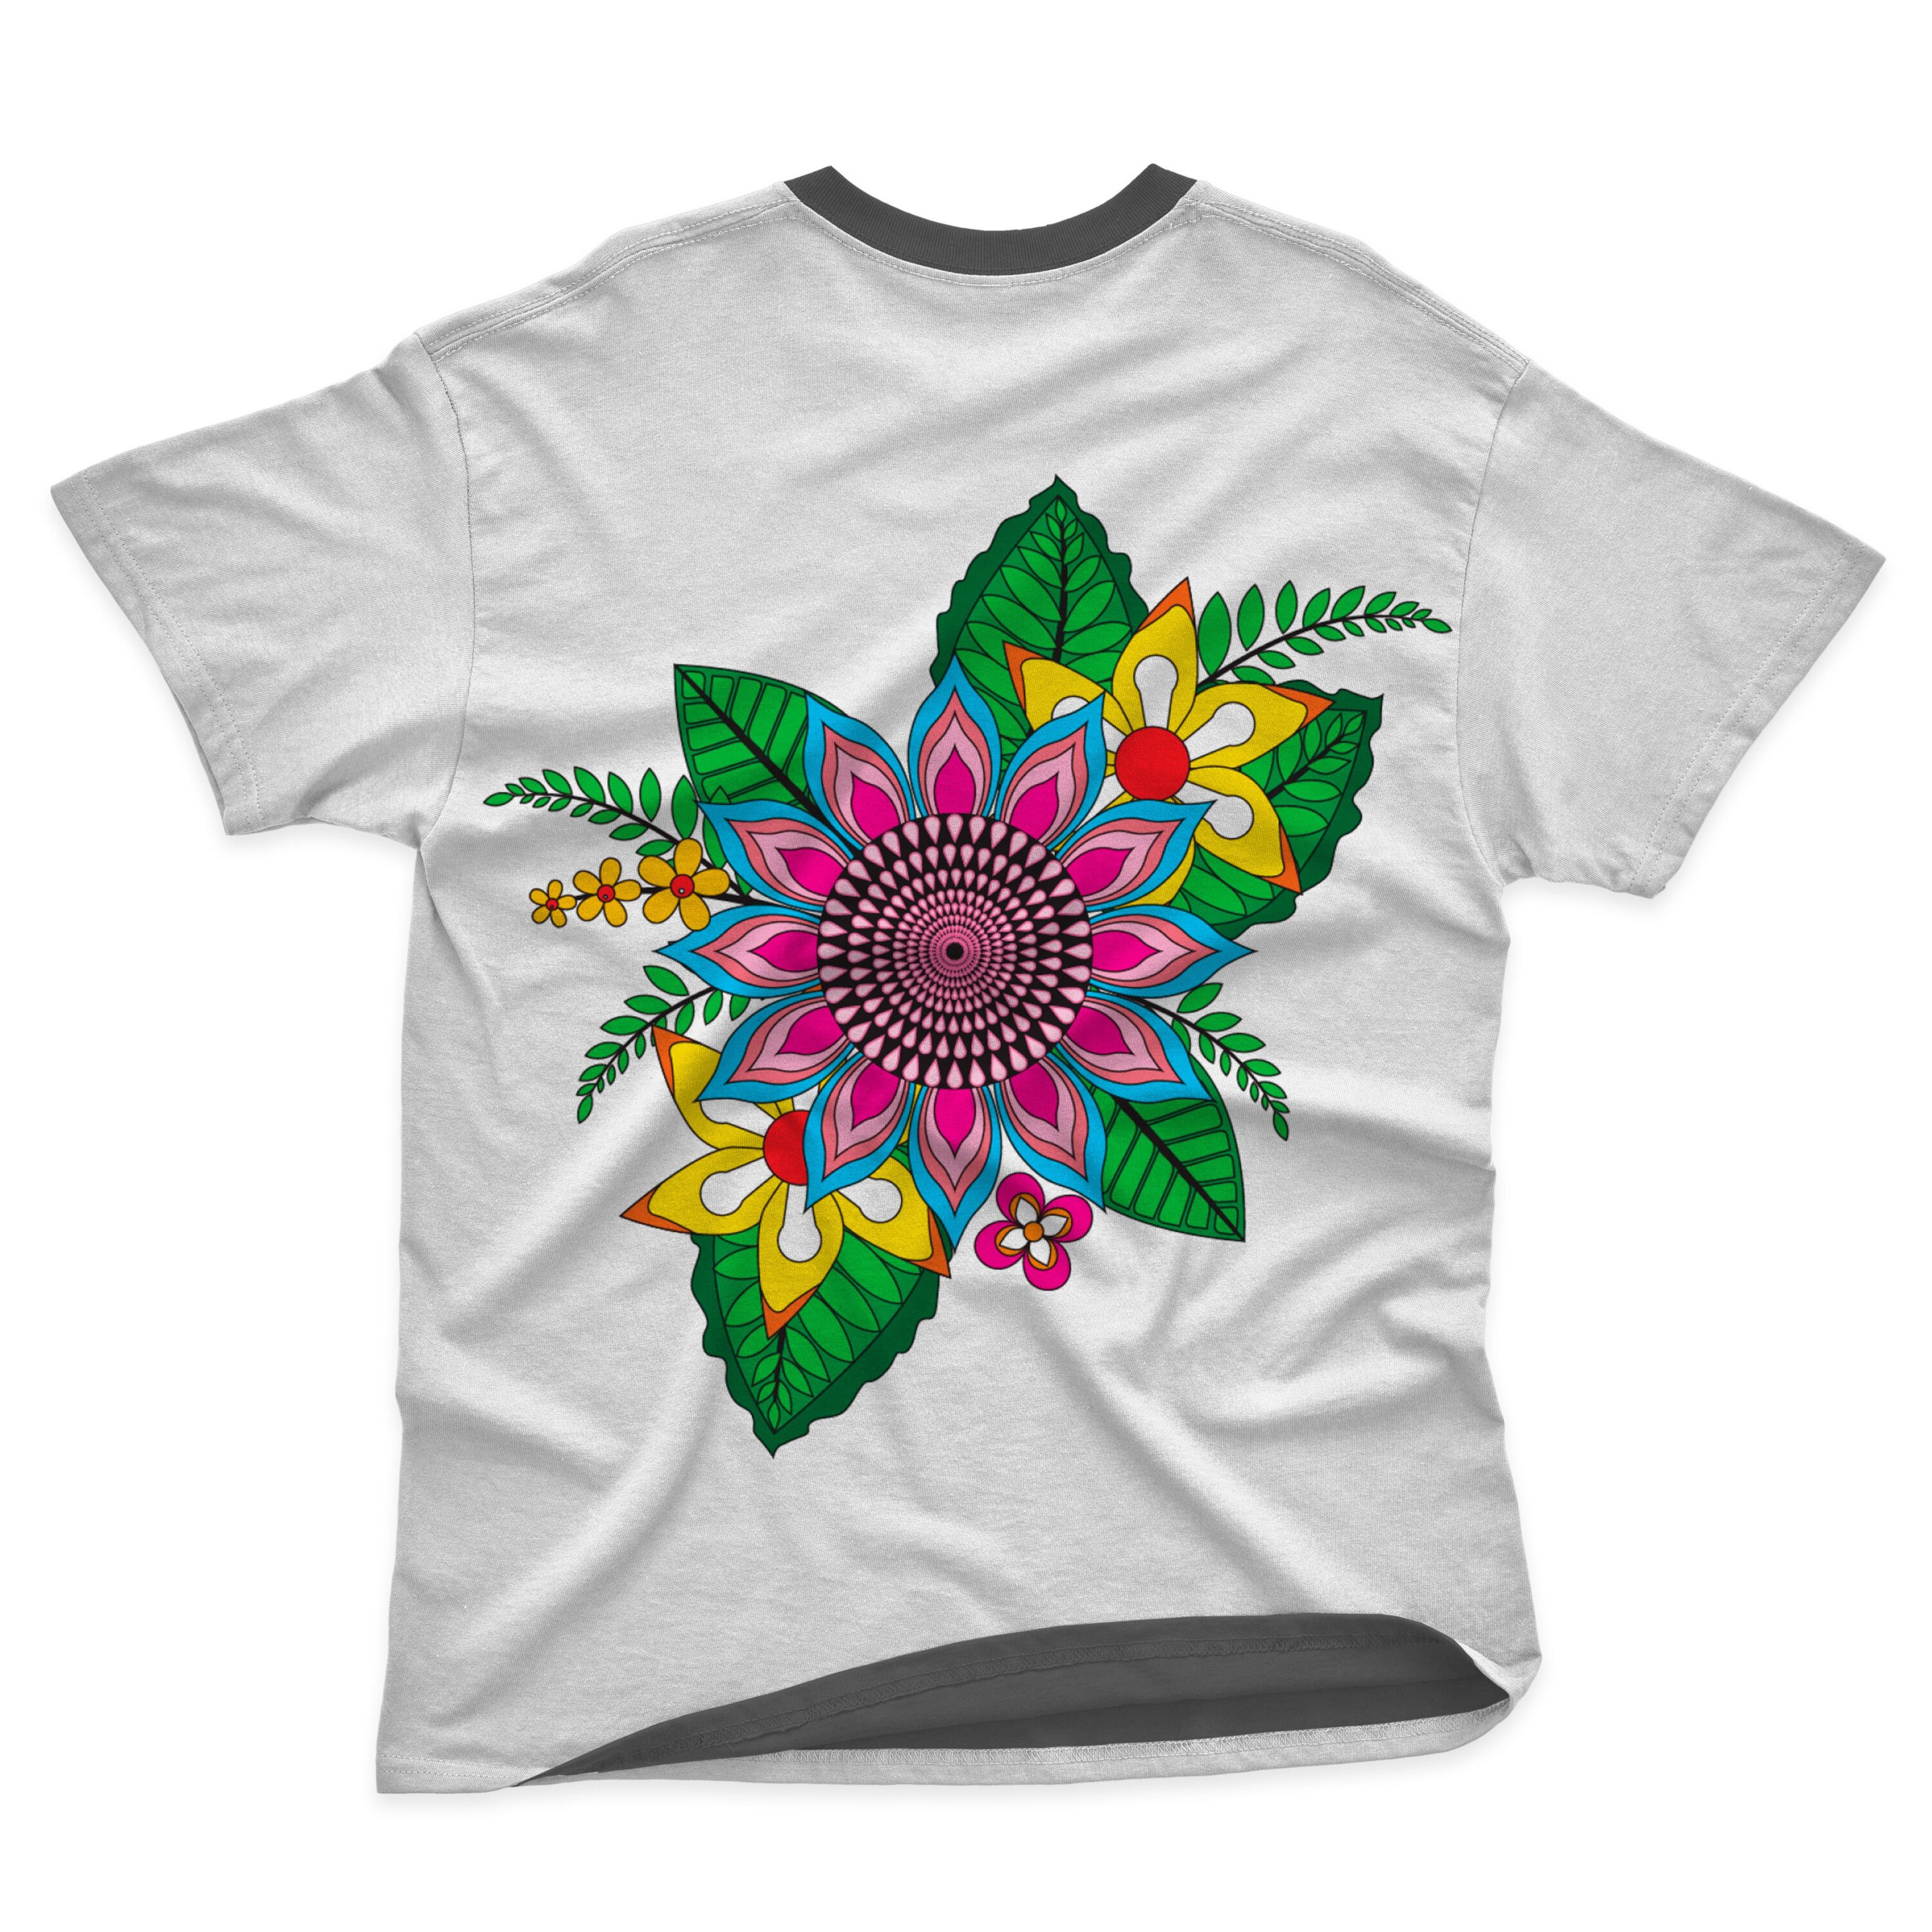 T-shirt design with beautiful pink flower.